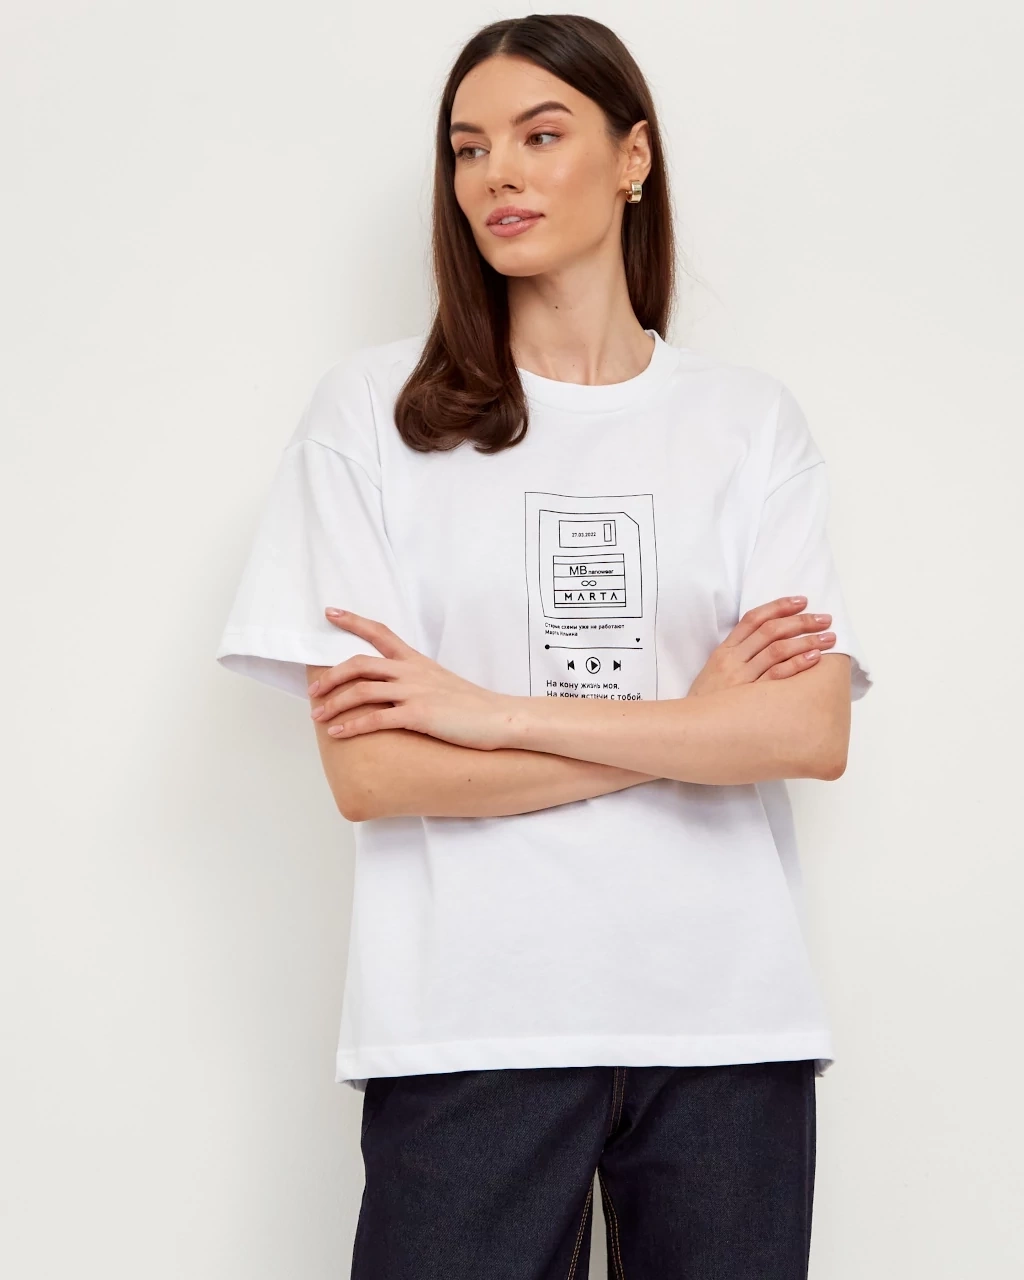 Thick jersey oversize T-shirt with a label and iron-on transfer white